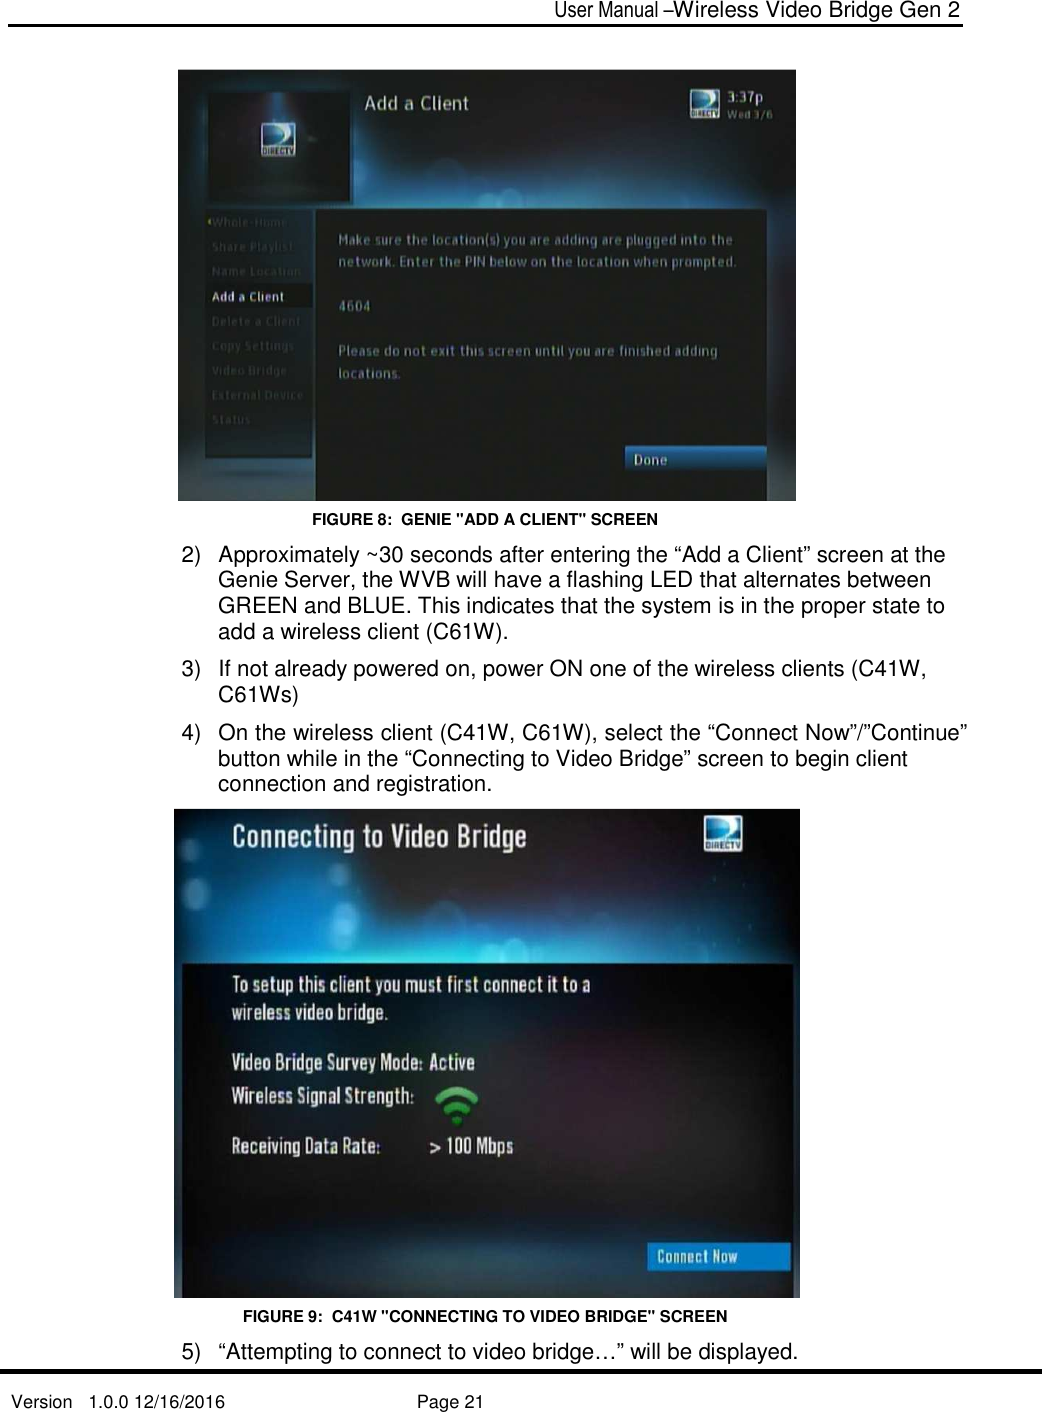  User Manual –Wireless Video Bridge Gen 2  Version   1.0.0 12/16/2016     Page 21    FIGURE 8:  GENIE &quot;ADD A CLIENT&quot; SCREEN 2)  Approximately ~30 seconds after entering the “Add a Client” screen at the Genie Server, the WVB will have a flashing LED that alternates between GREEN and BLUE. This indicates that the system is in the proper state to add a wireless client (C61W).   3)  If not already powered on, power ON one of the wireless clients (C41W, C61Ws) 4)  On the wireless client (C41W, C61W), select the “Connect Now”/”Continue” button while in the “Connecting to Video Bridge” screen to begin client connection and registration.   FIGURE 9:  C41W &quot;CONNECTING TO VIDEO BRIDGE&quot; SCREEN 5)  “Attempting to connect to video bridge…” will be displayed.  